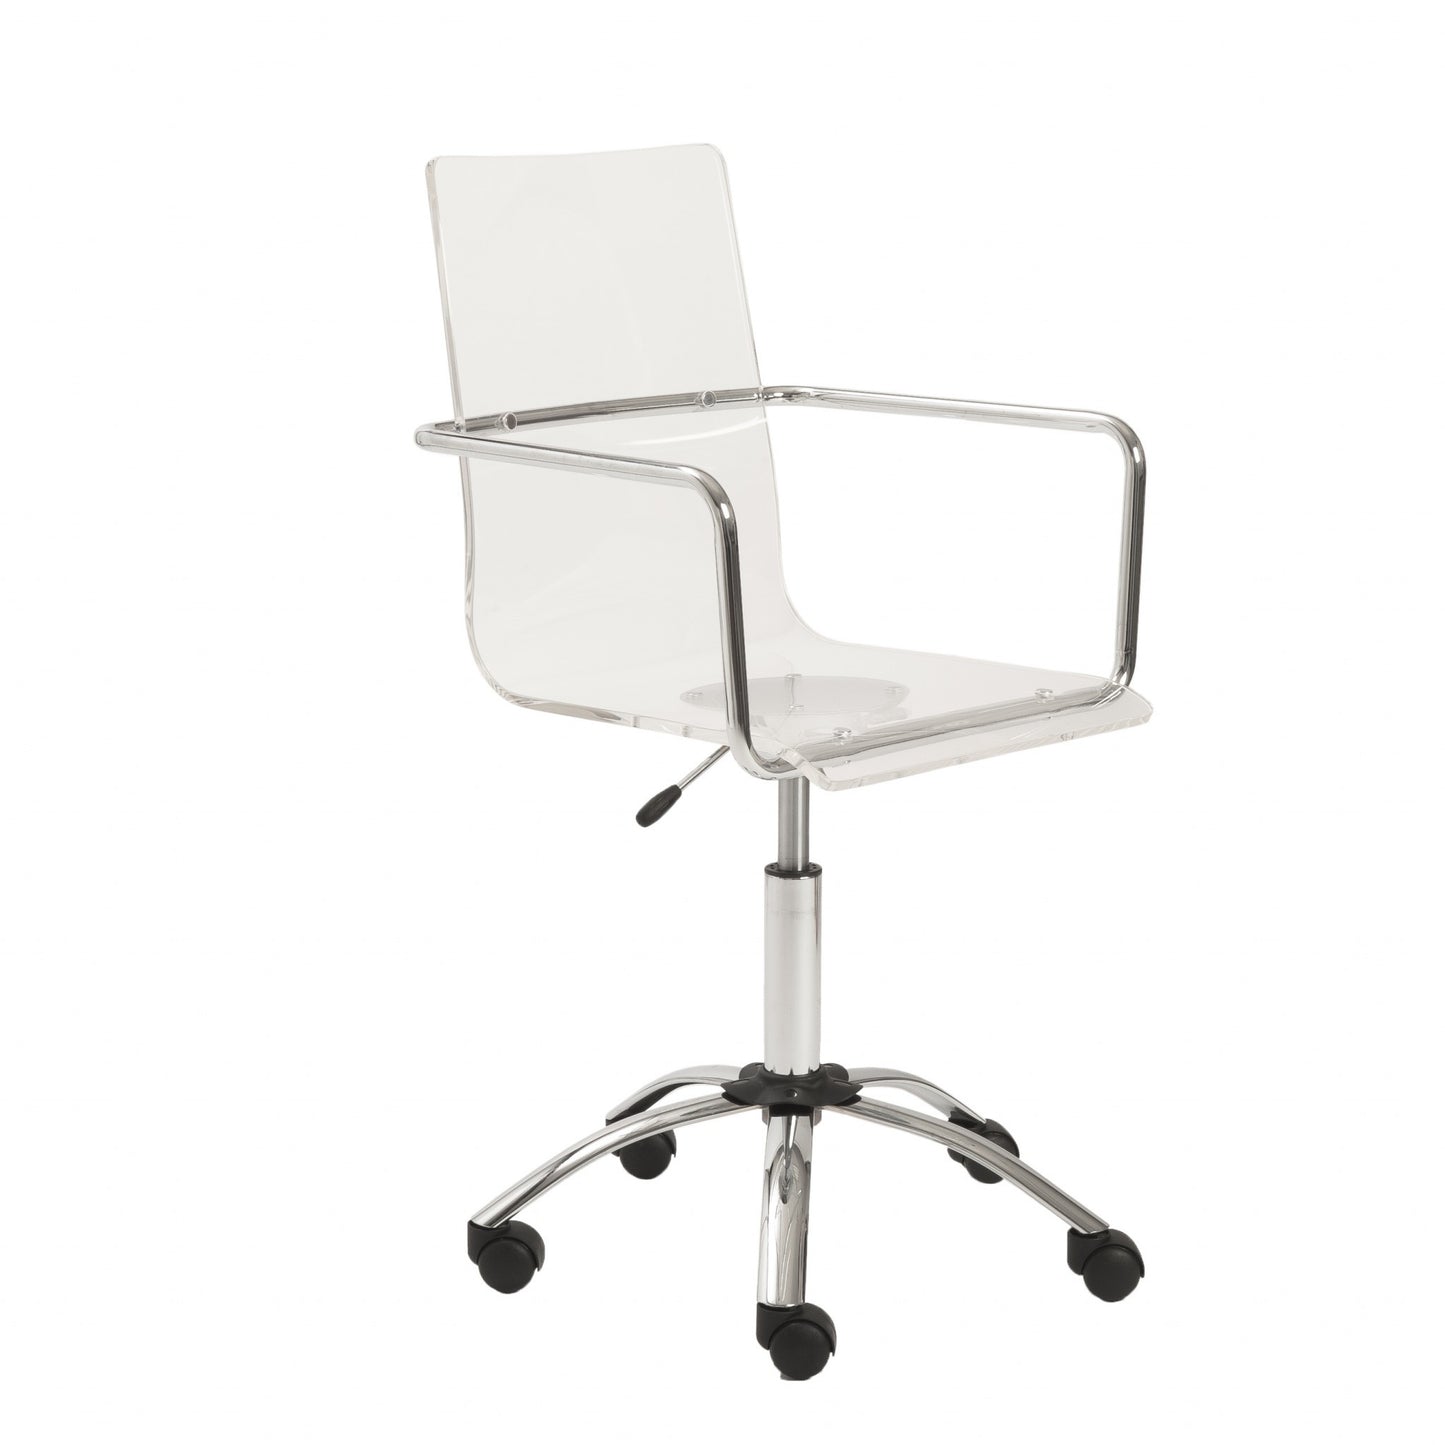 Clear and Silver Adjustable Swivel Plastic Rolling Conference Office Chair